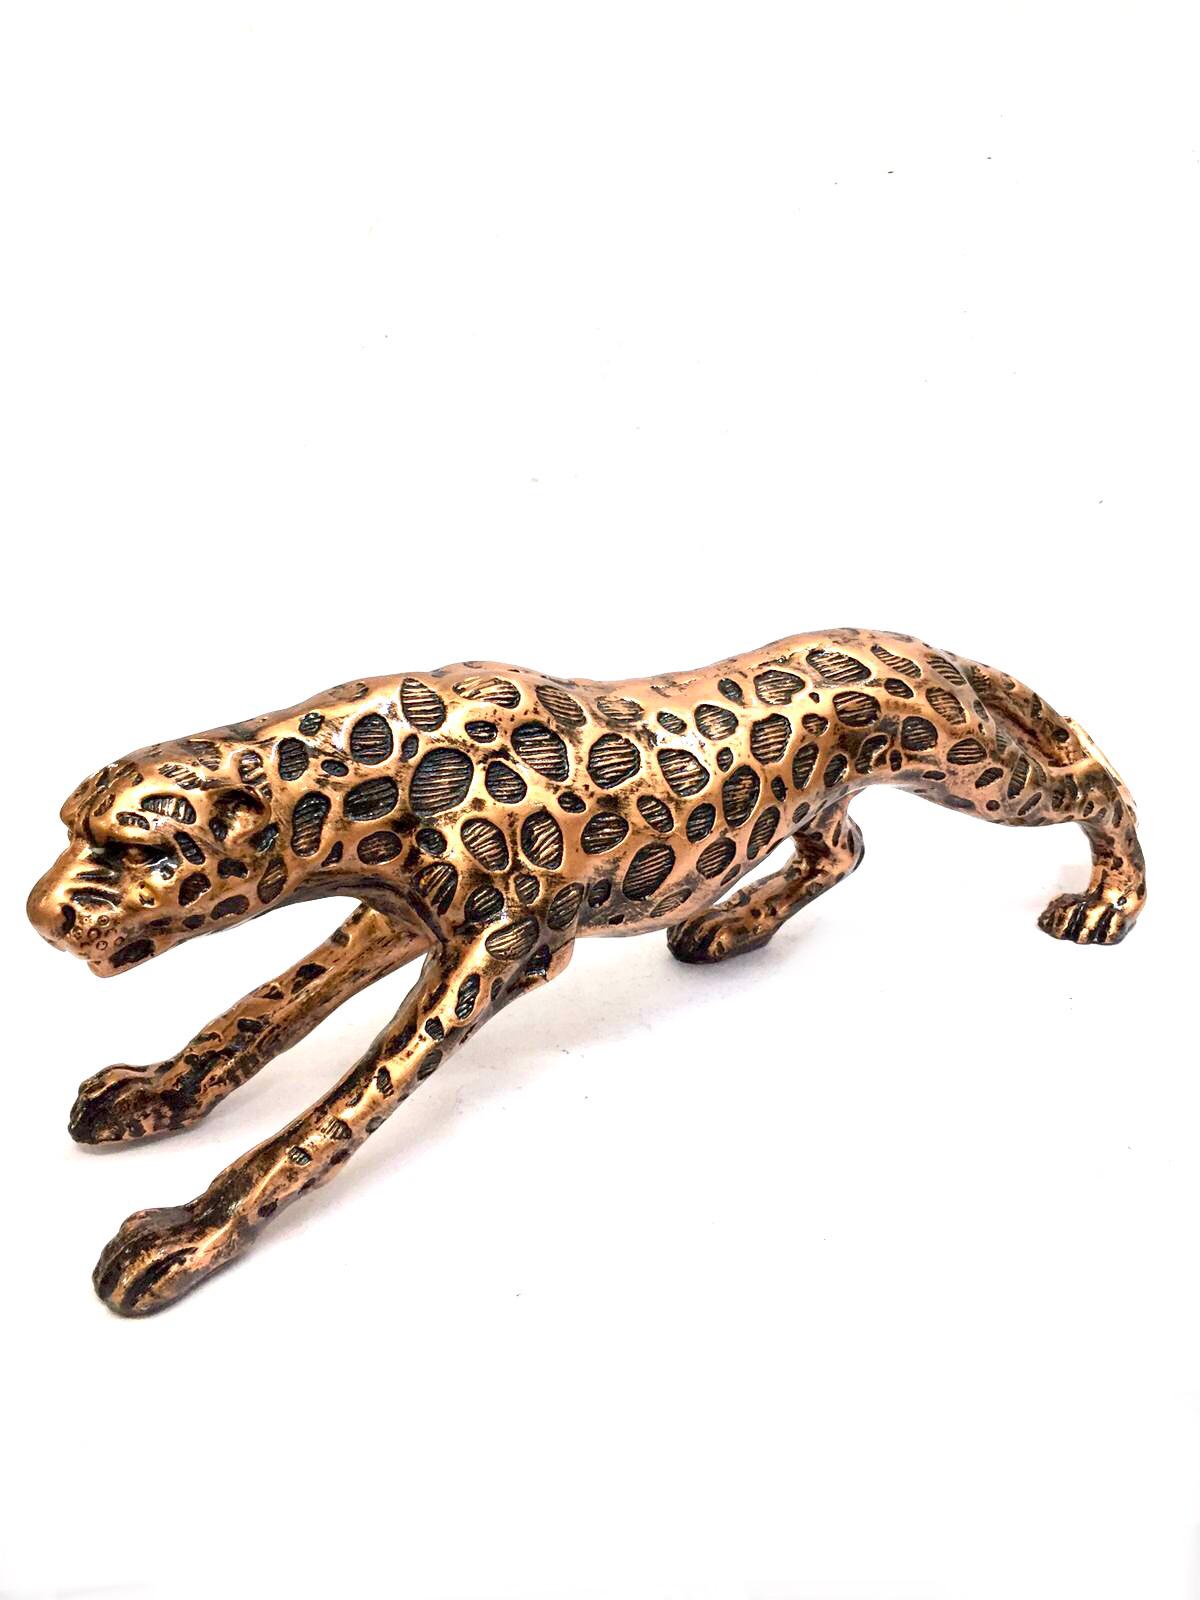 Cheetah Exclusive Lifelike Animal Exclusive Design Every Space Décor Tamrapatra